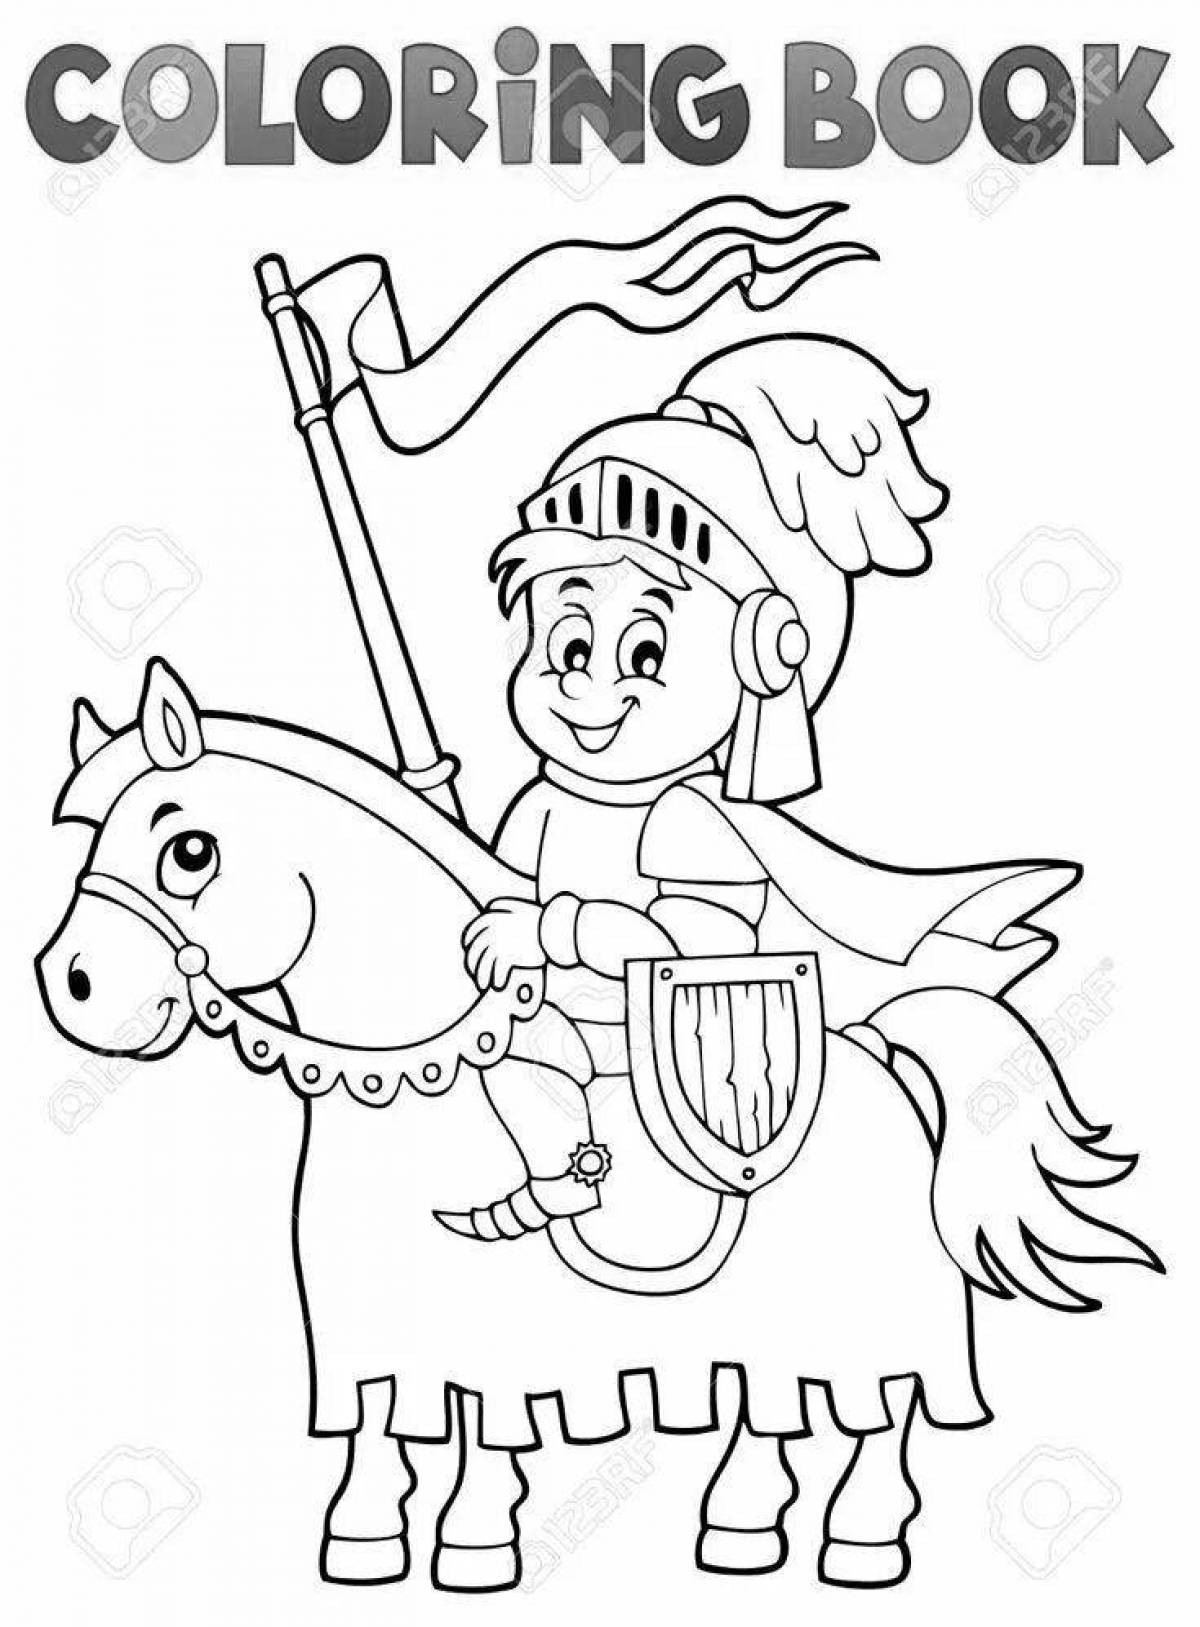 Sublime coloring page knight on horseback